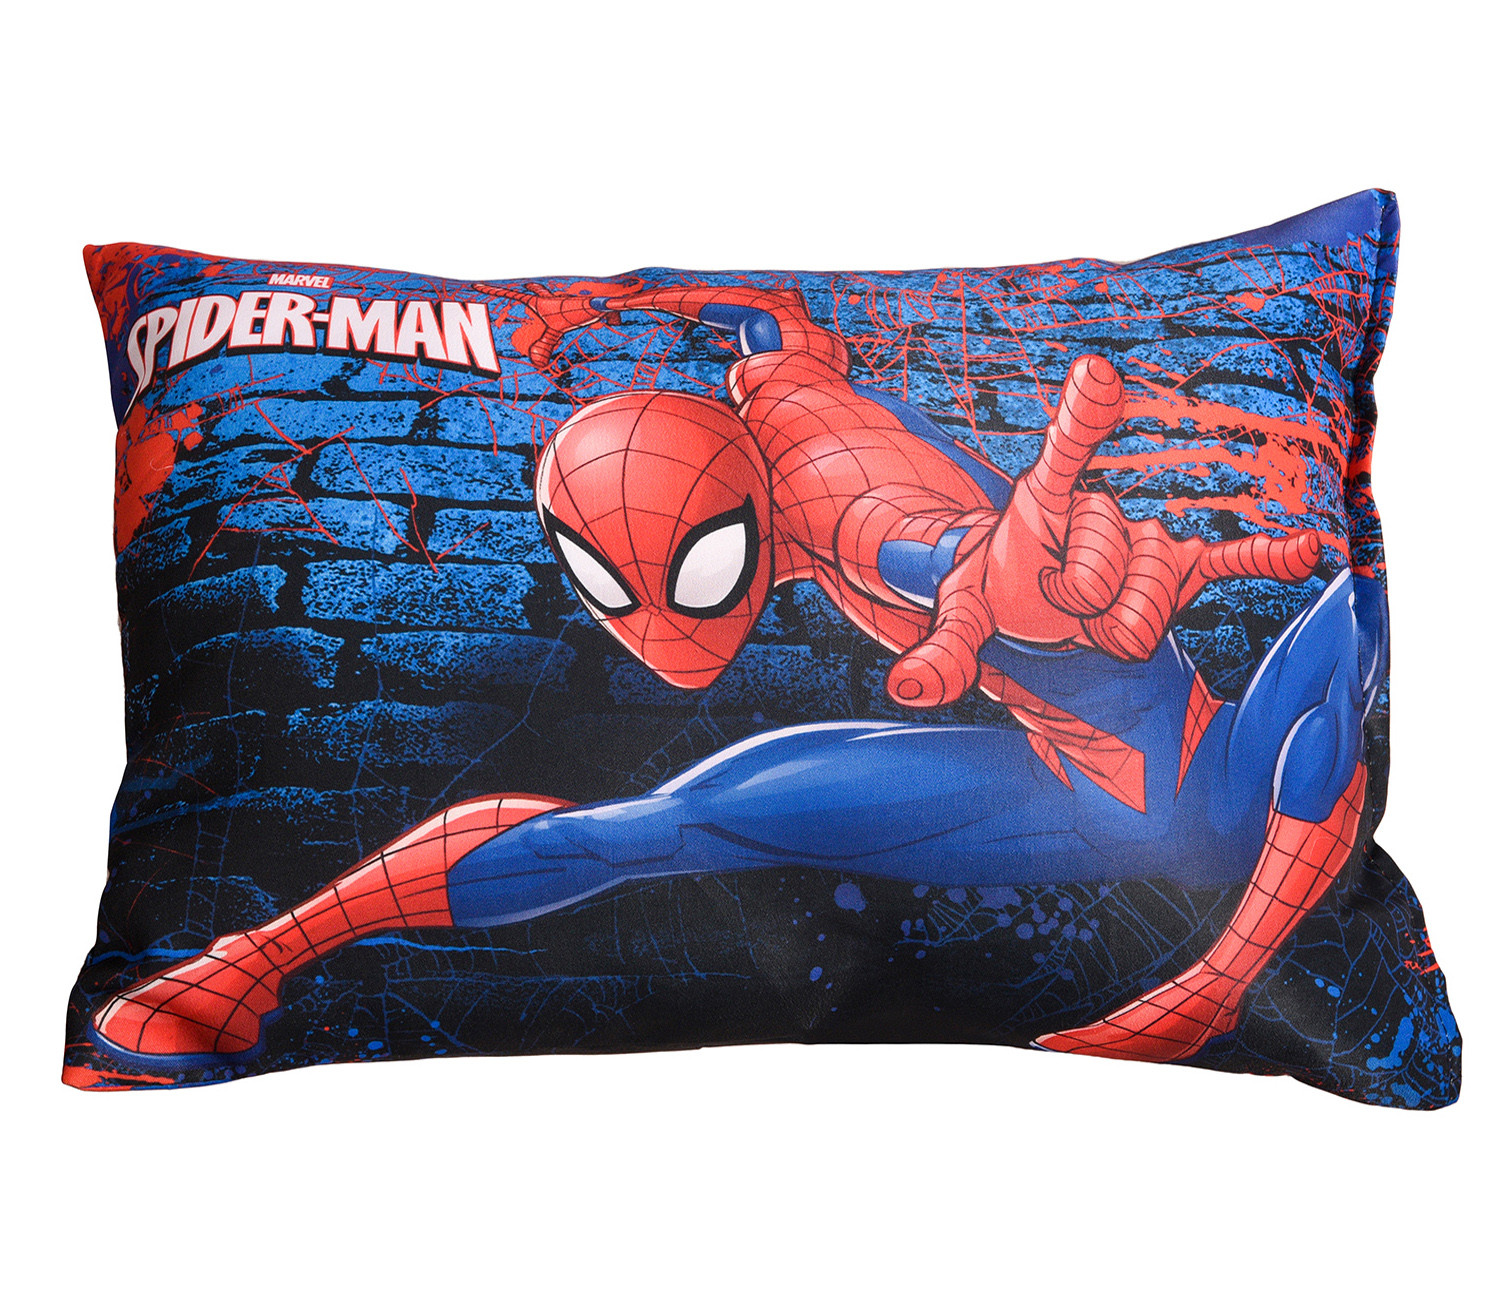 Kuber Industries Marvel Spiderman Print Baby Pillow|Polyester Super soft Kids Pillow for Sleeping & Travel,12 x 18 Inch,(Navy Blue)